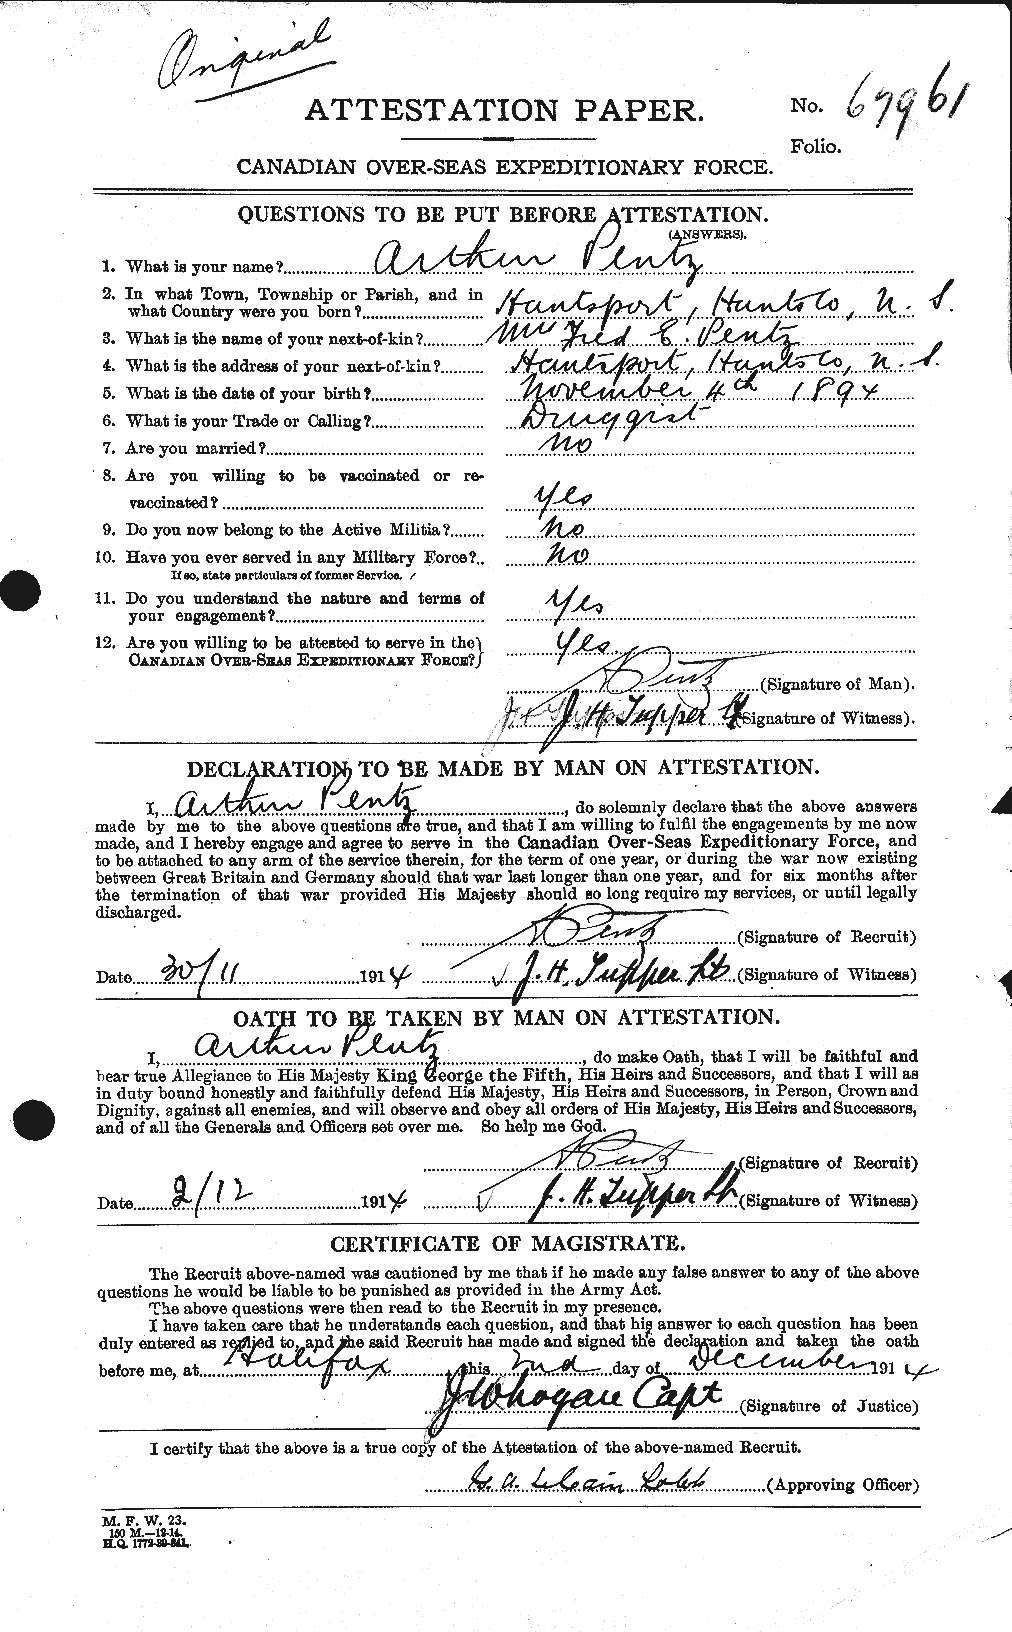 Personnel Records of the First World War - CEF 573488a